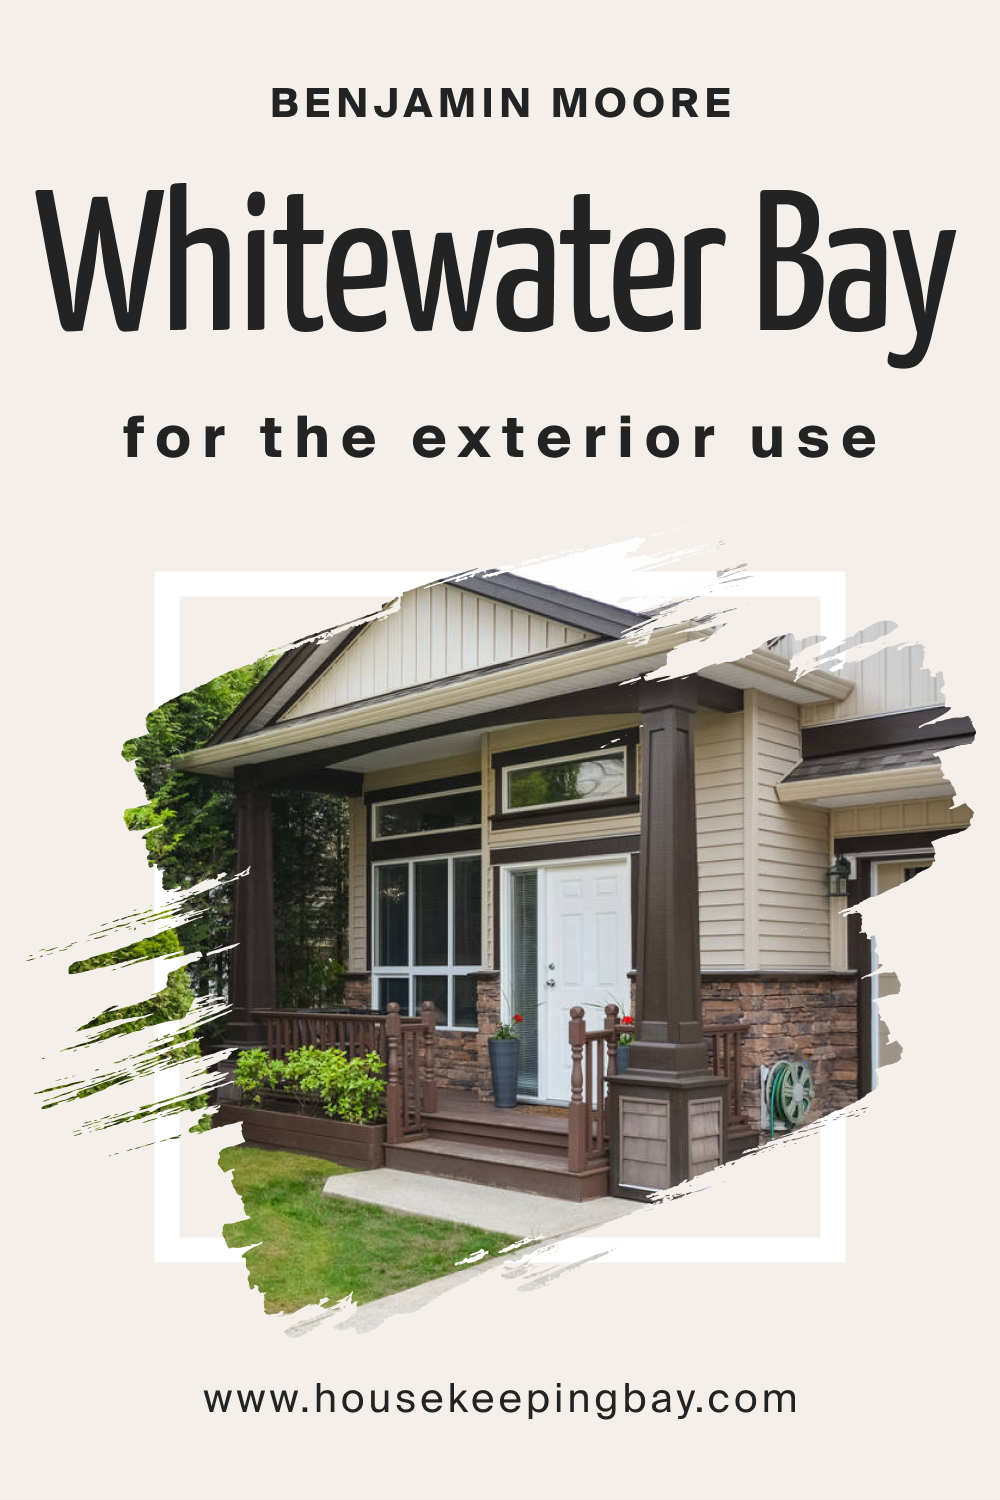 Benjamin Moore. Whitewater Bay OC 70 for the Exterior Use